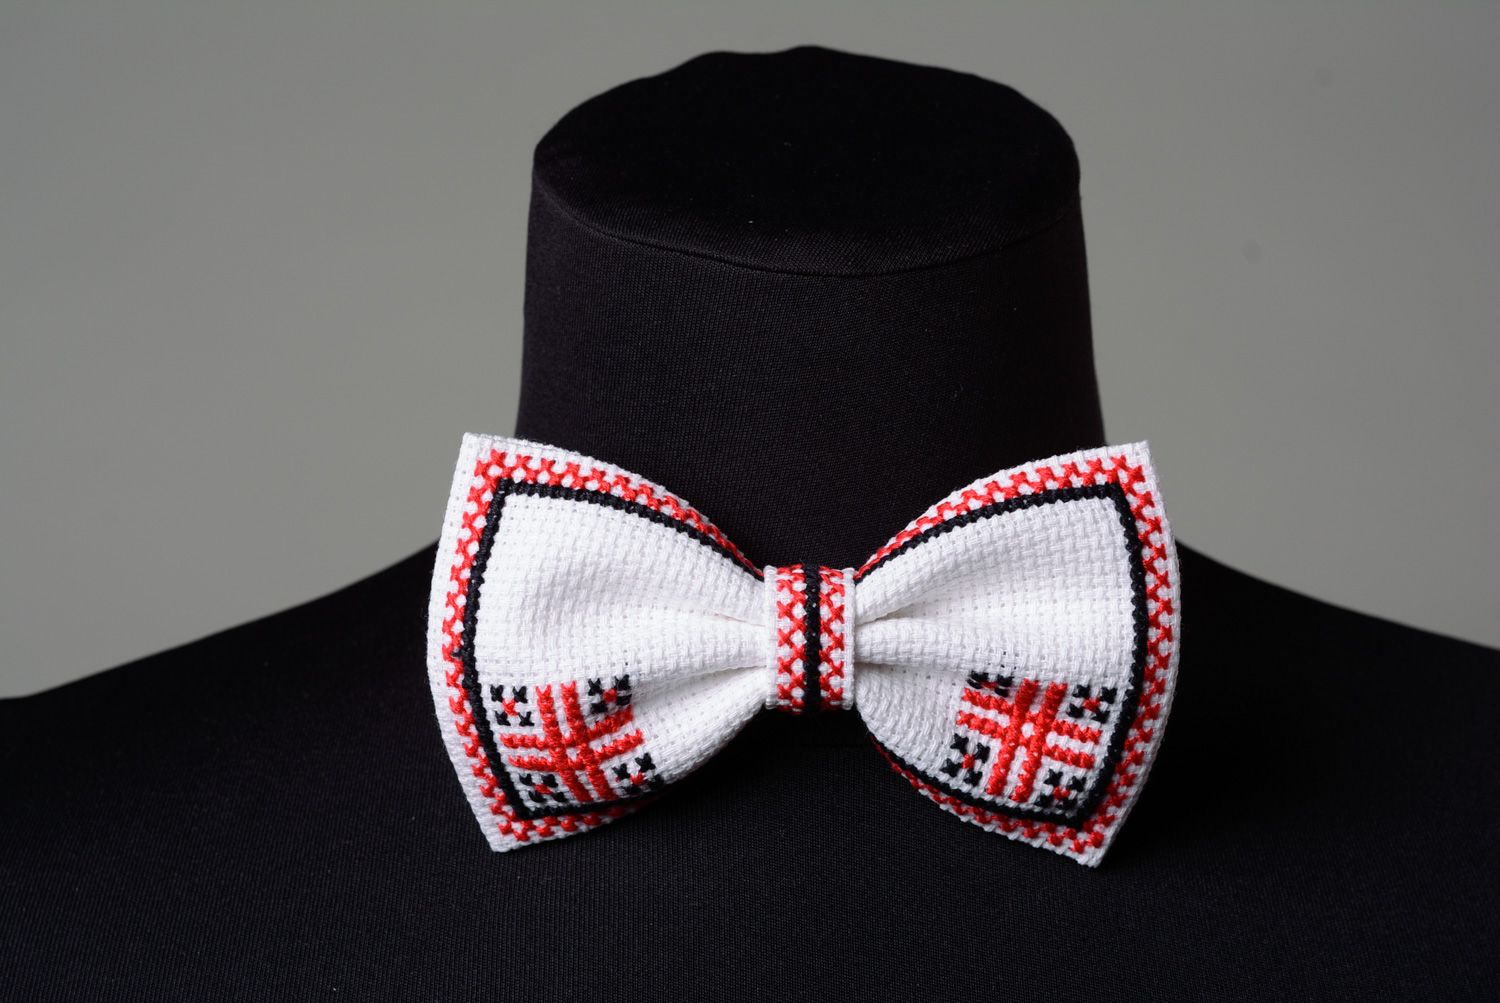 Handmade bow tie with ethnic cross stitch embroidery photo 1